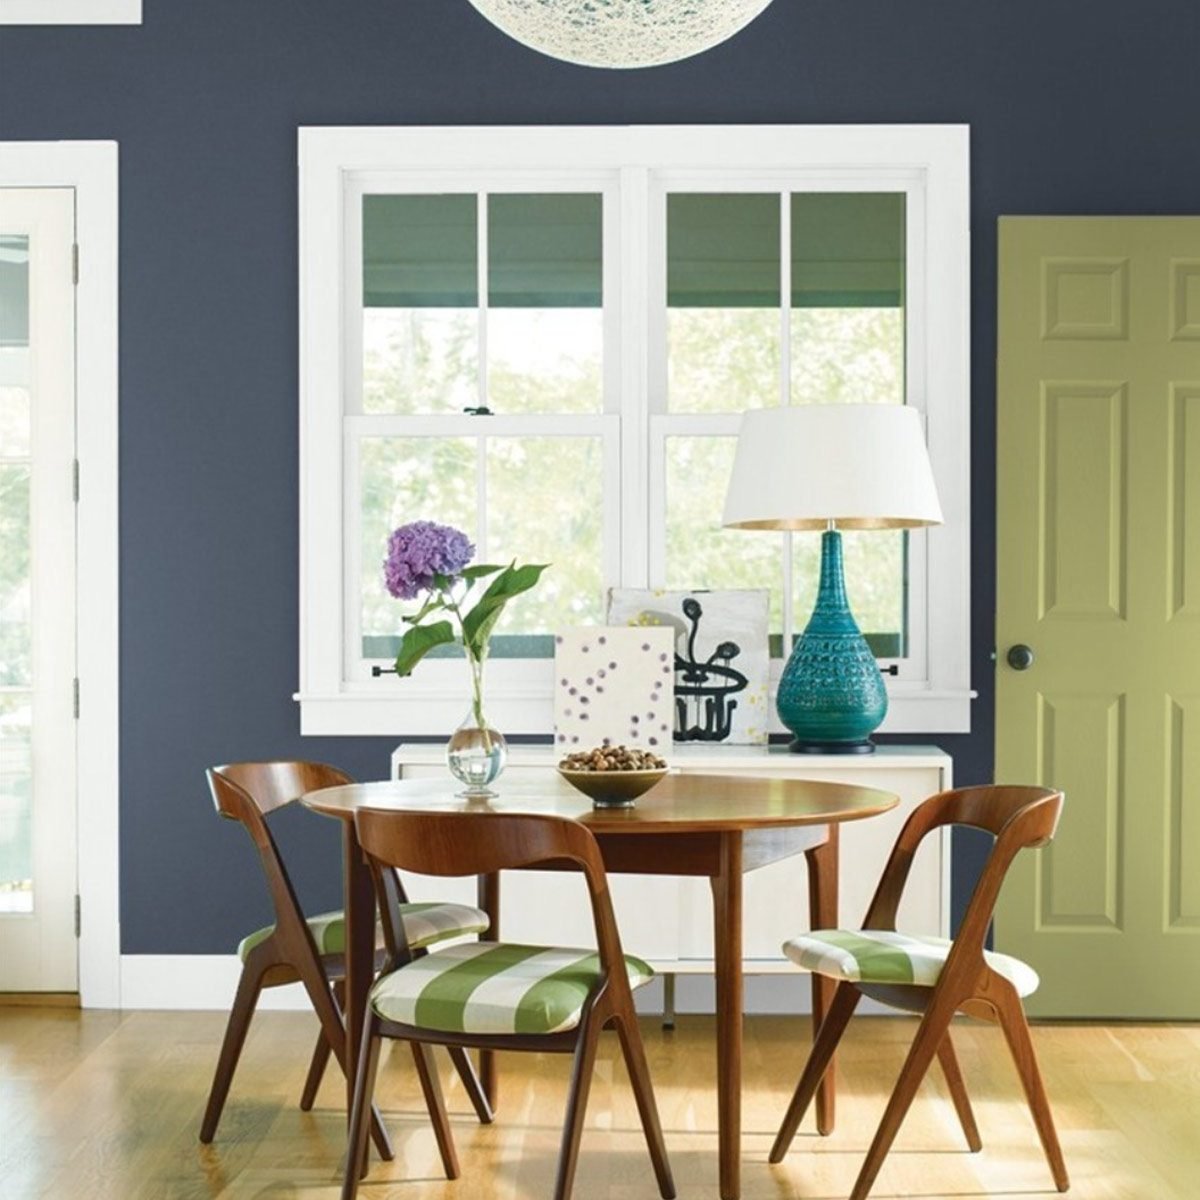 10 Best Wall Paint Colors for the Home Interior